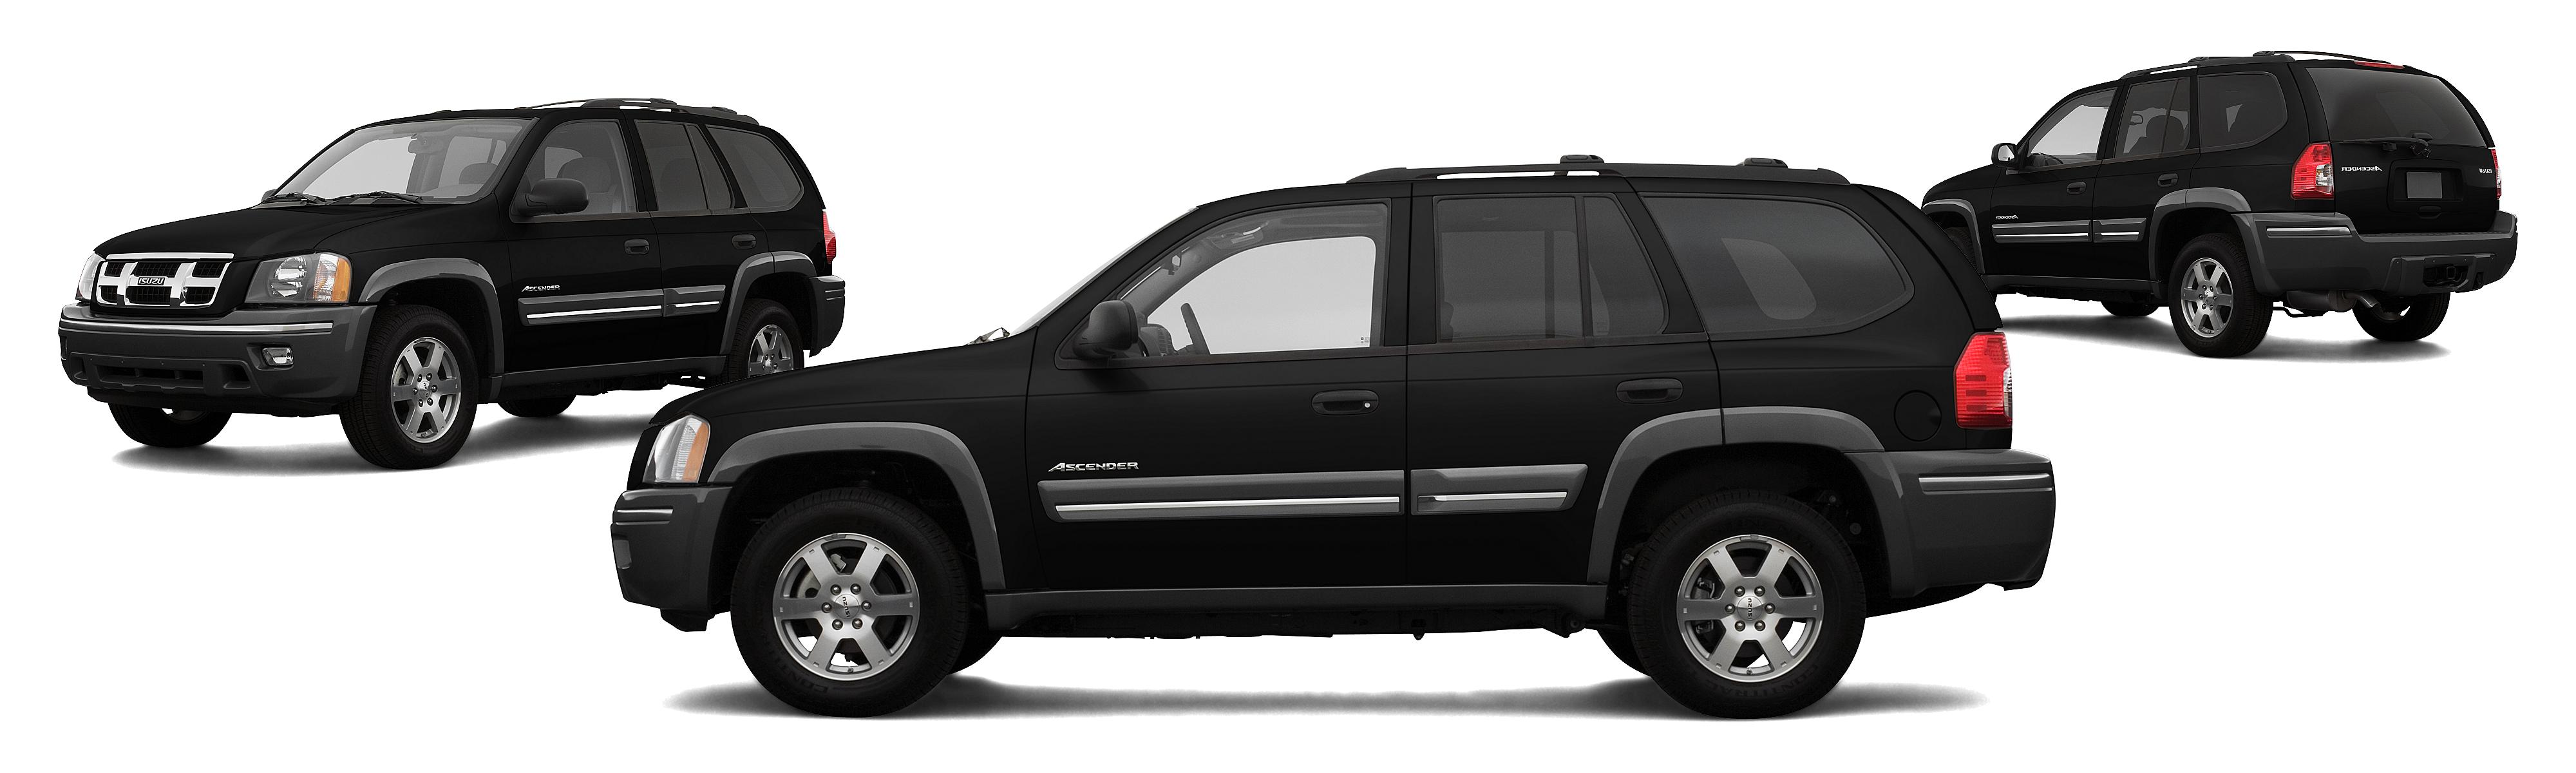 2007 Isuzu Ascender S 4dr SUV 4WD - Research - GrooveCar